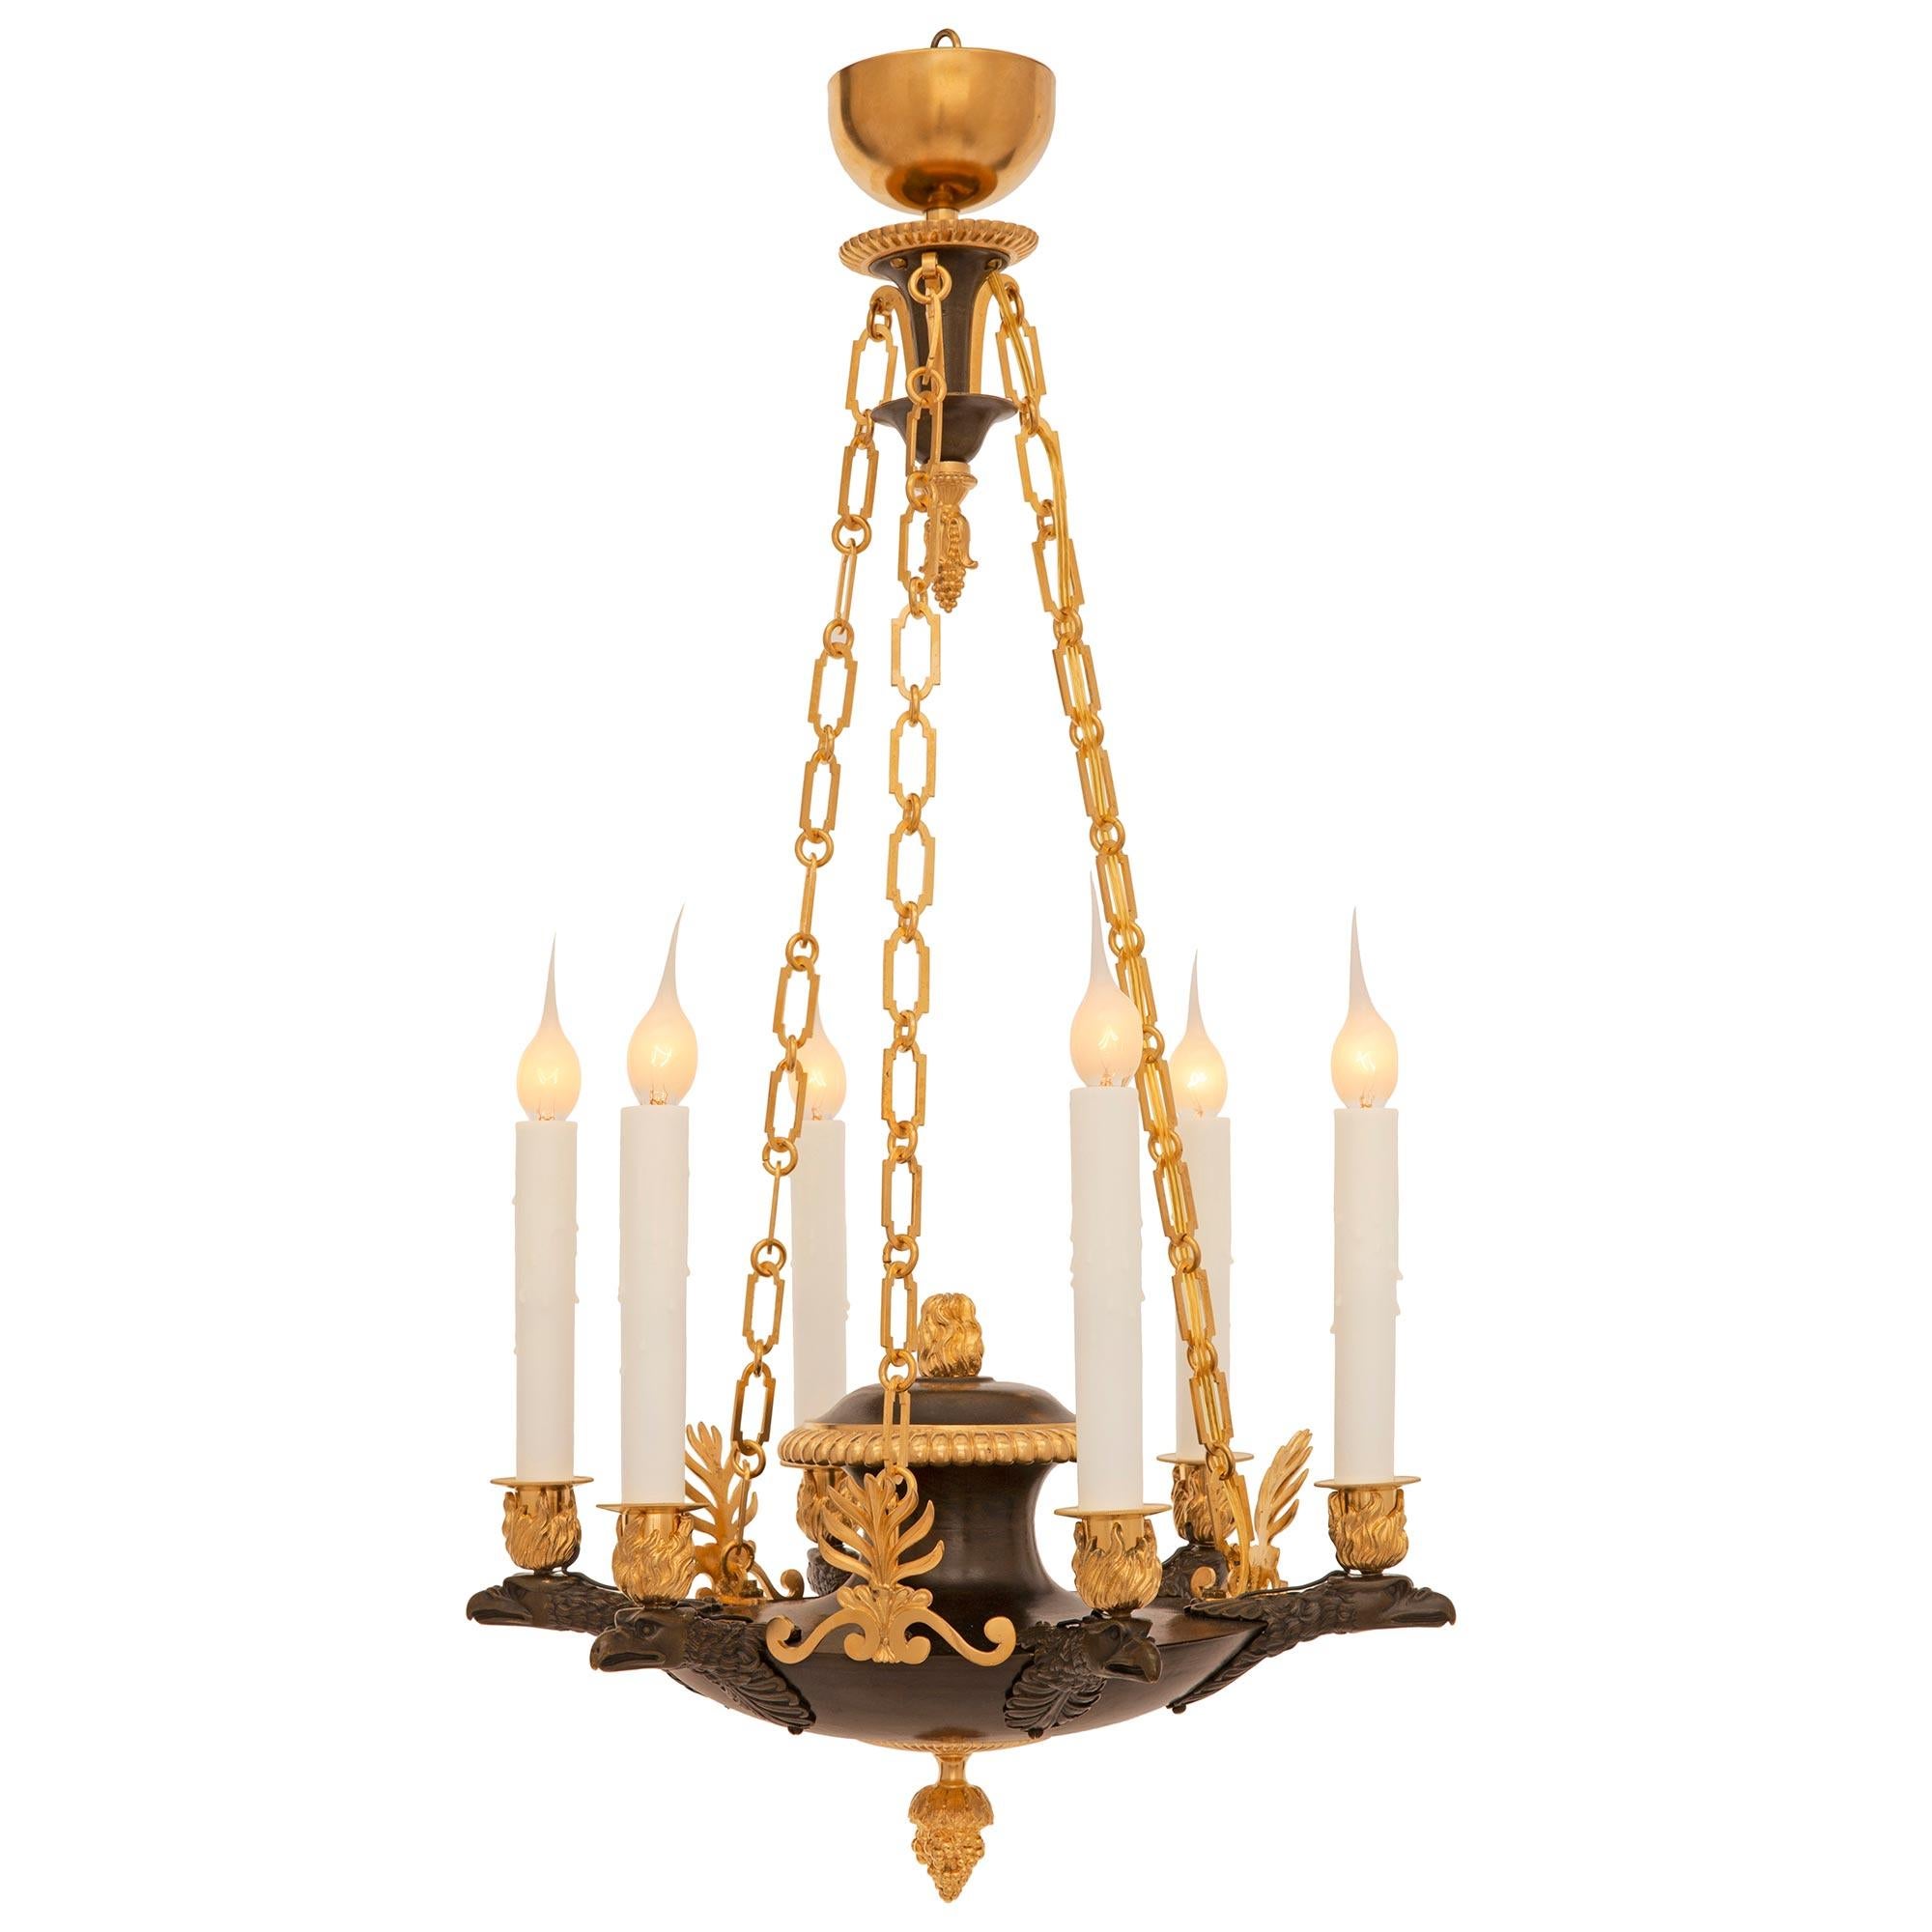 A striking French 19th century Neo-Classical st. patinated bronze and ormolu chandelier. The six arm chandelier is centered by a beautiful richly chased bottom ormolu berried finial below the elegant rounded body with finely detailed palmettes and